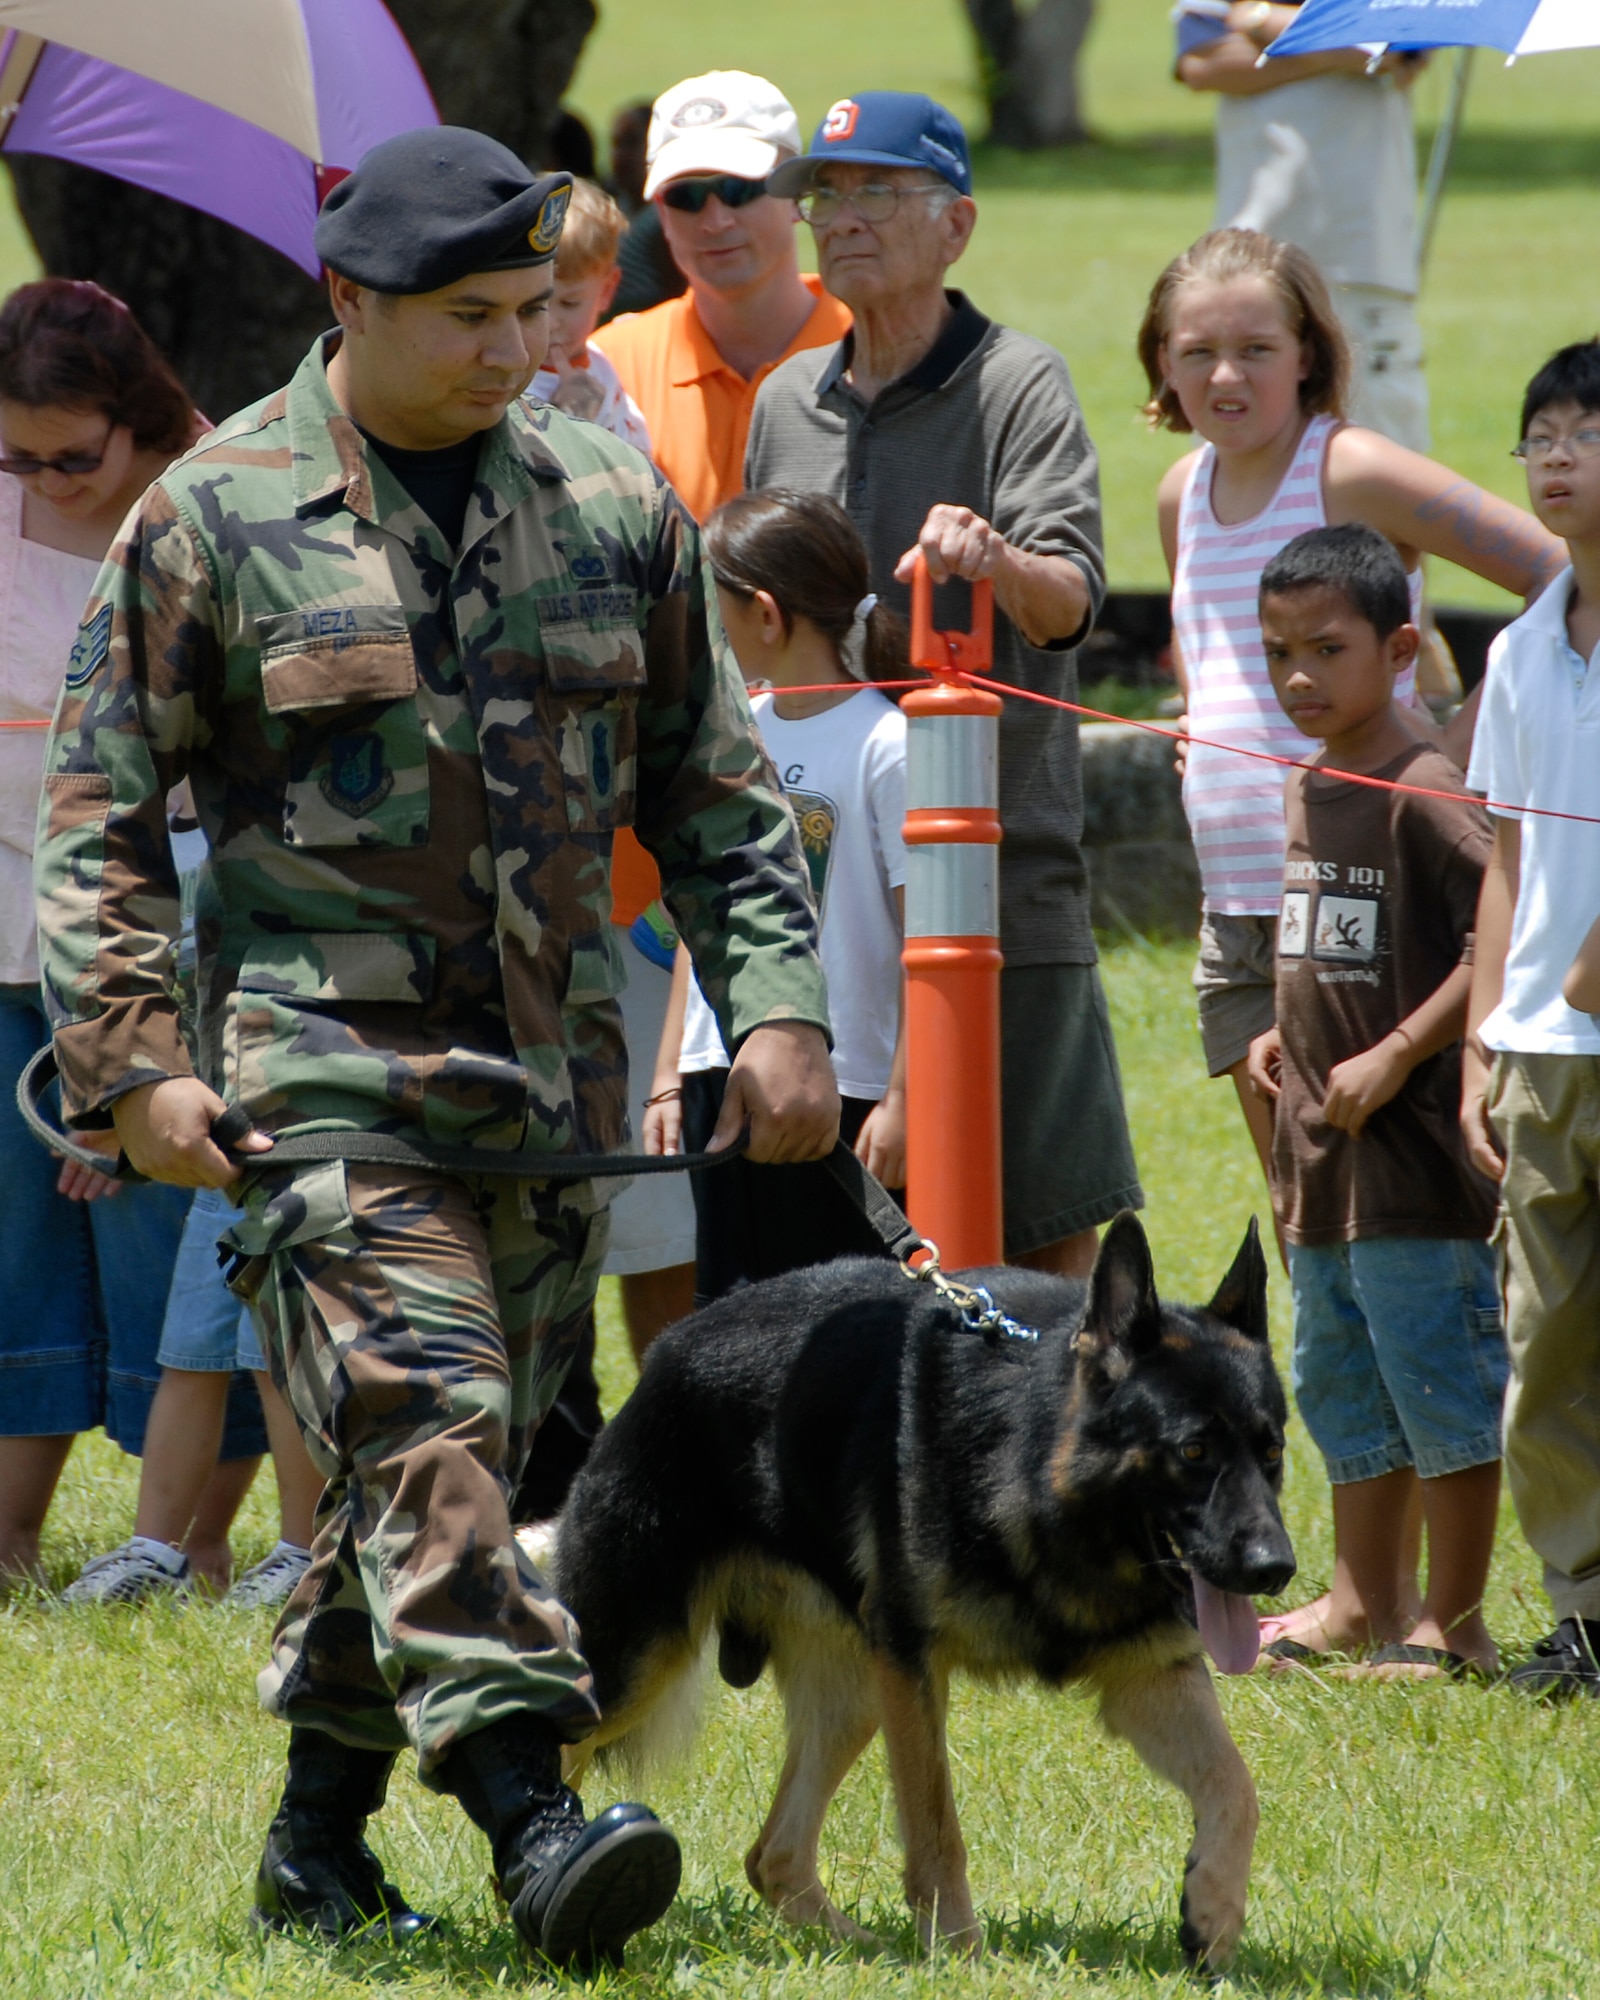 ANDERSEN AIR FORCE BASE GUAM, Staff Sgt. Joe Meza, a 36th Security Forces Squadron K9 handler, walks the perimeter of the K9 exhibition during the Air Force Week's demonstration at Ypao Beach Park Sept. 8. (U.S. Air Force Photo by Airman First Class Daniel Owen)